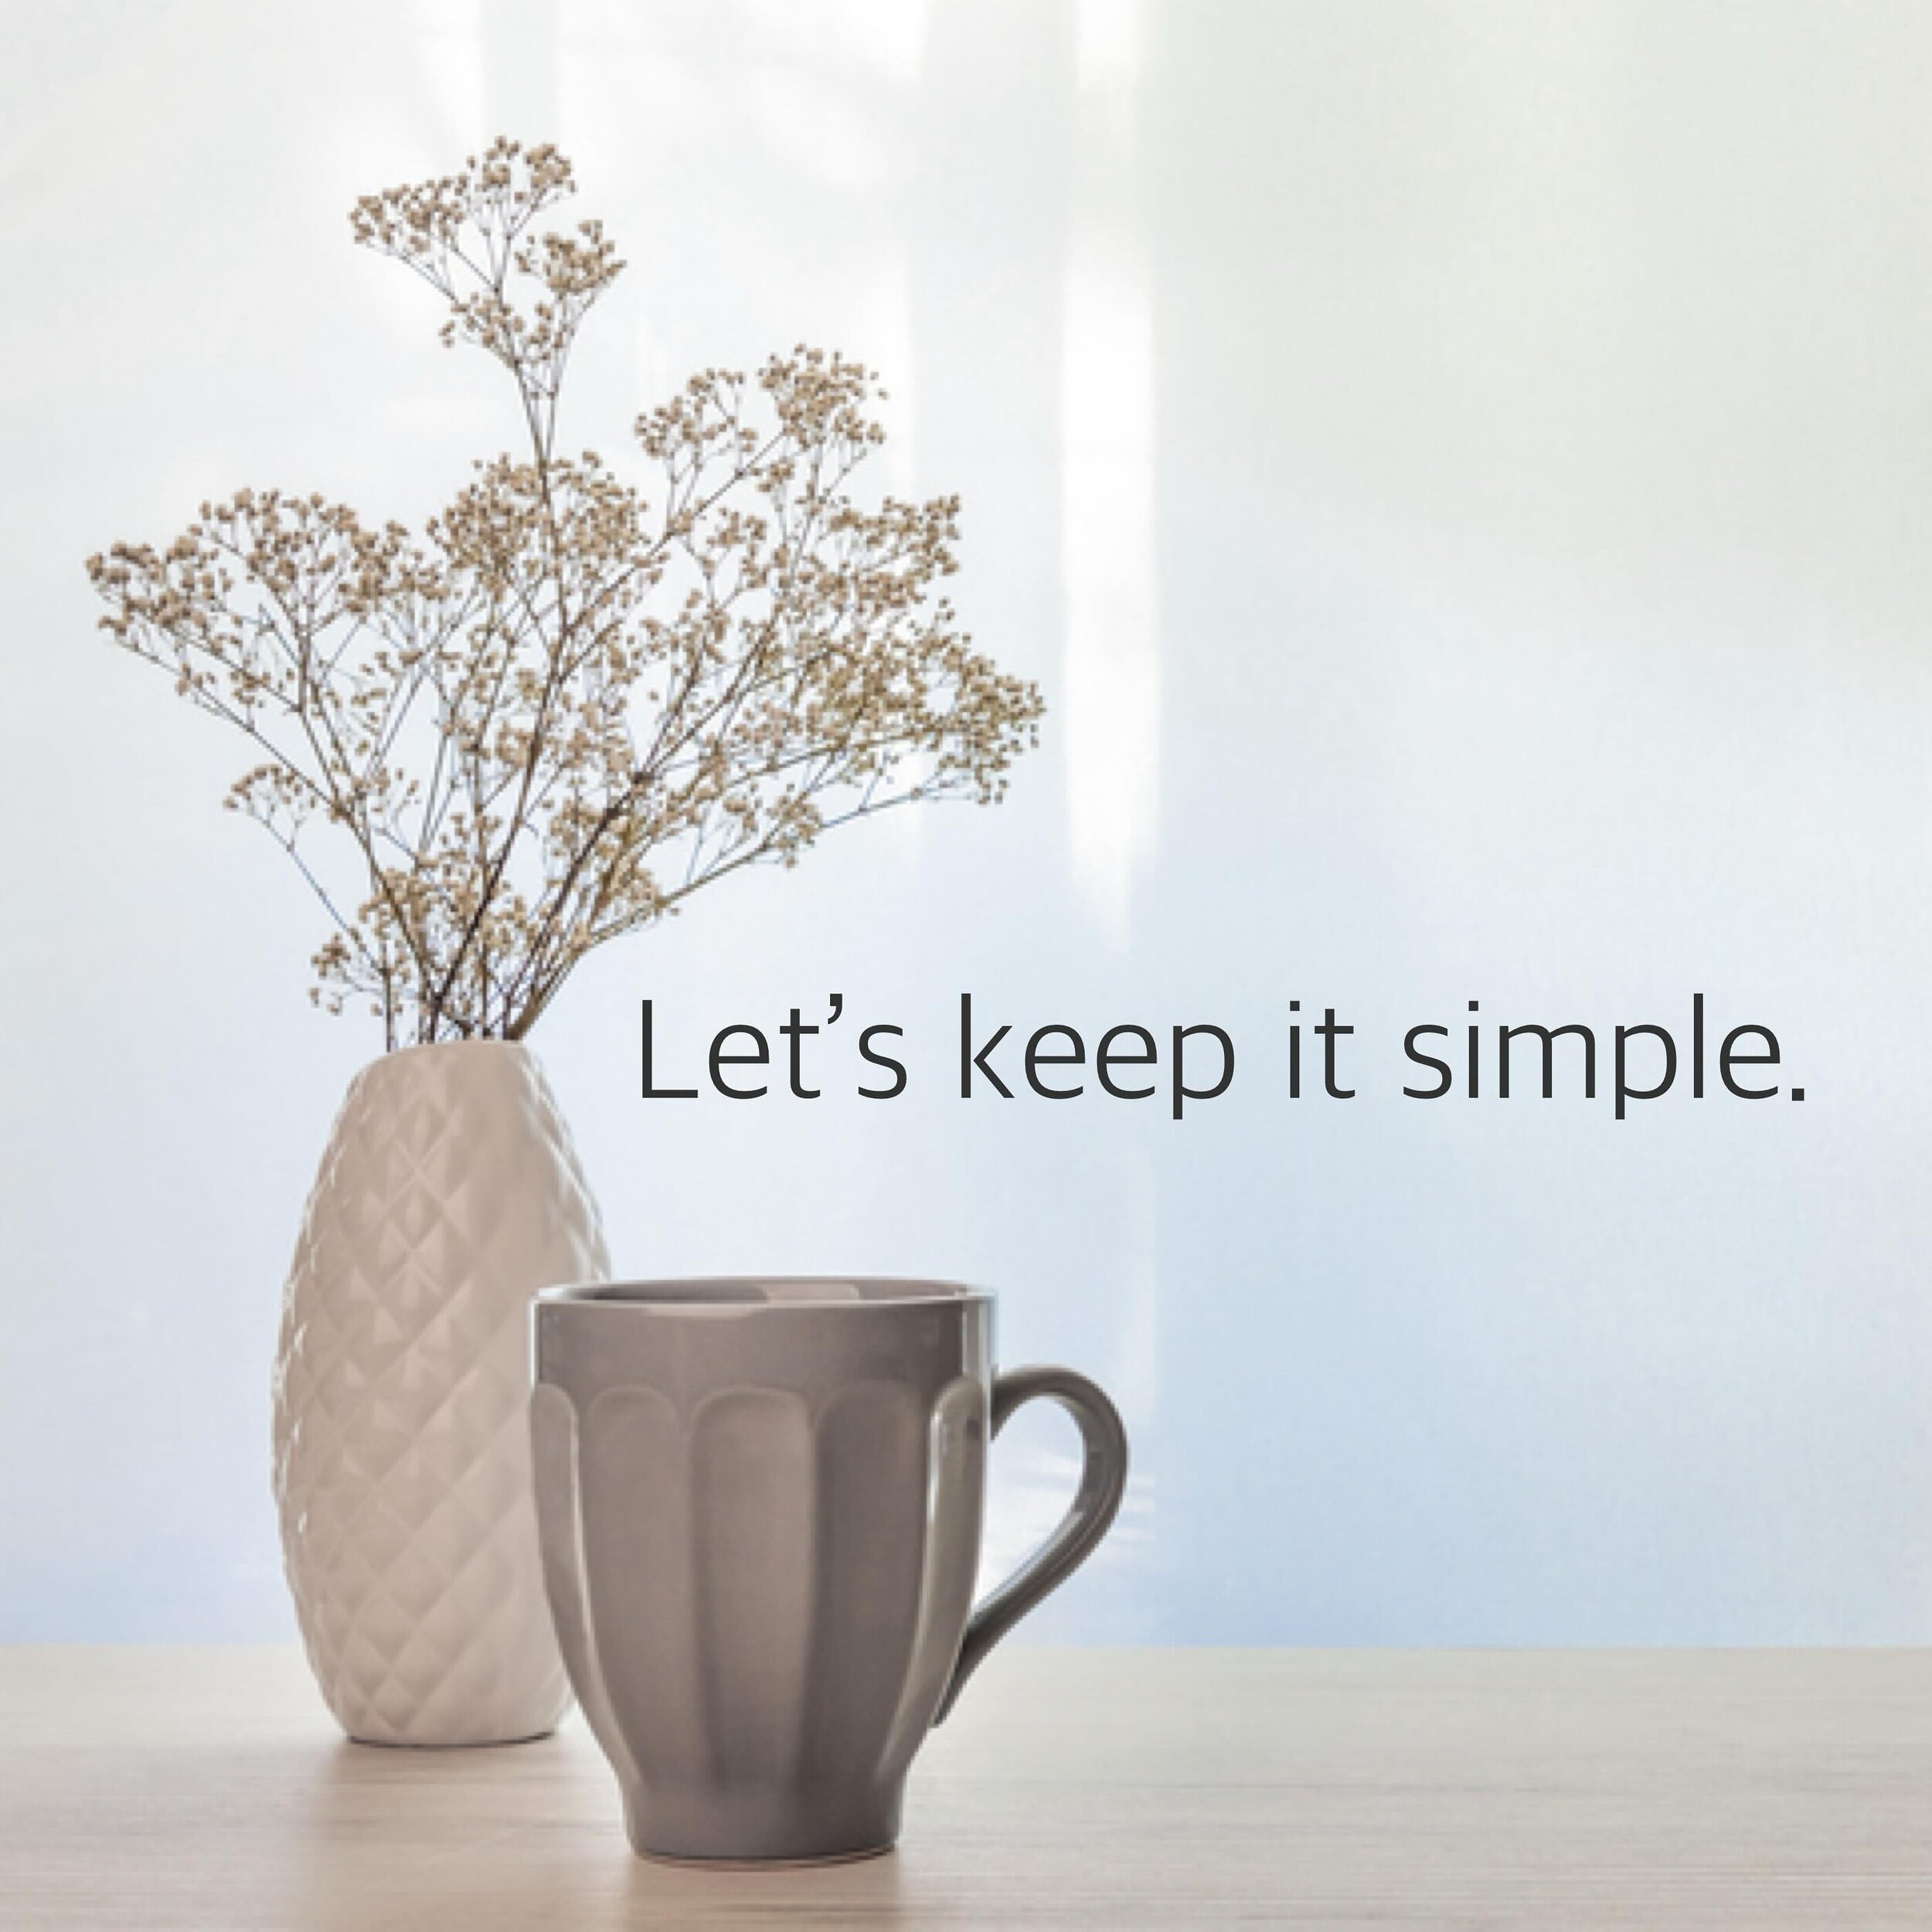 Simple
I want to see simple.
Simple faith.
Simple family.
Simple friendships
Simple fellowship.
Simple food.
I want to see simple celebrations, simple kindness, simple health solutions, simple living, let&rsquo;s keep it all simple.
Art, music, beaut